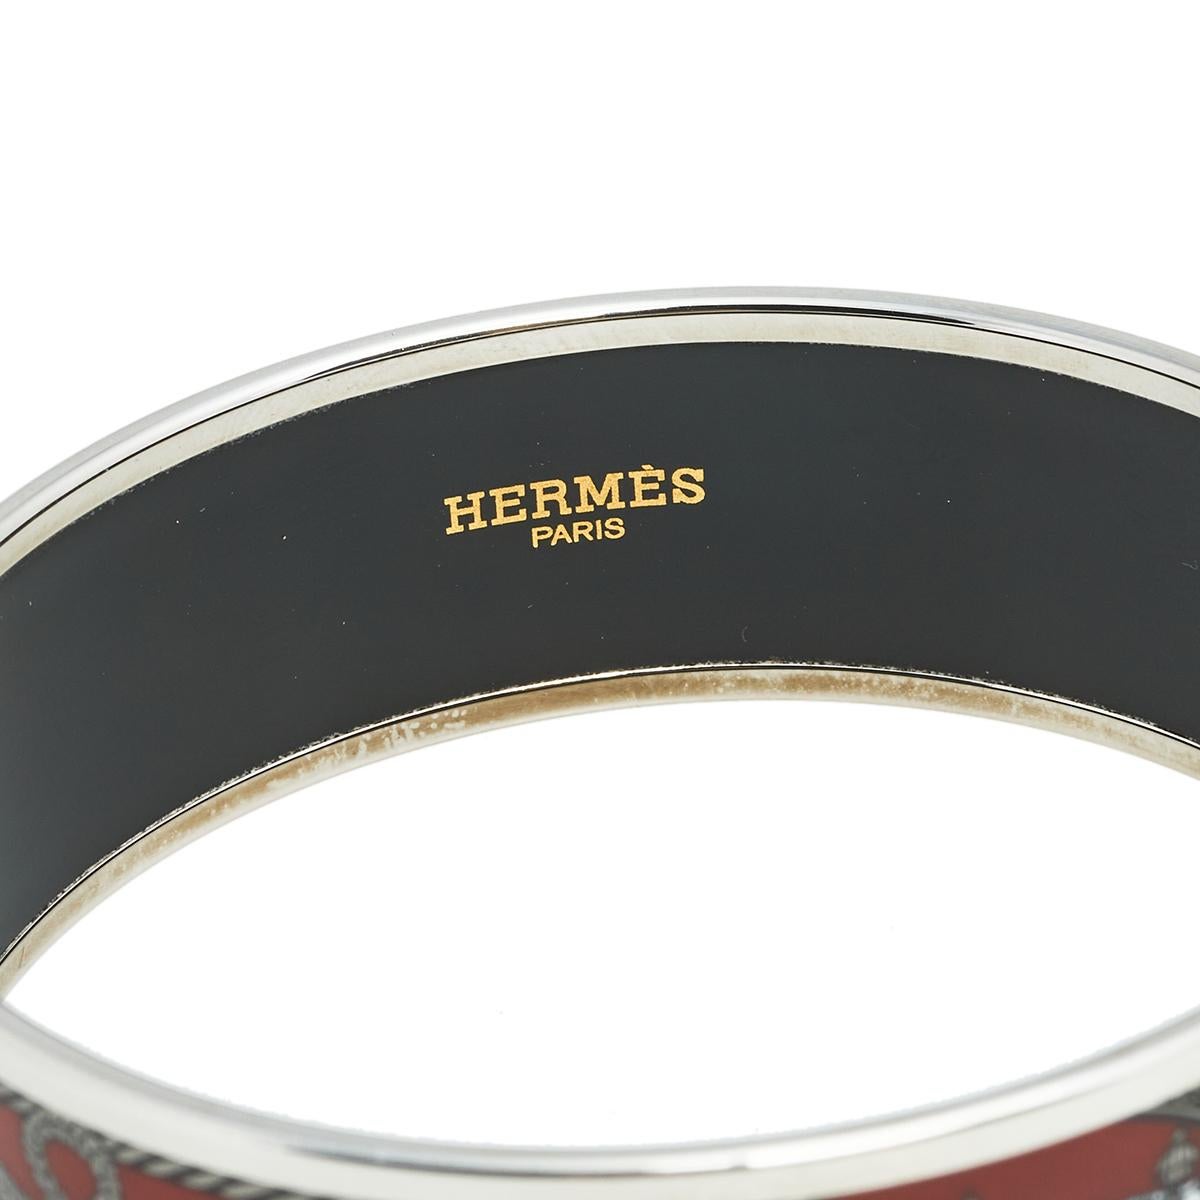 A wide bangle is an easy way to make a style statement no matter the outfit. Here is one such statement piece by Hermes. The palladium-plated bangle has a smooth construction and a grand display of enamel for a luxe end result.

Includes: Original